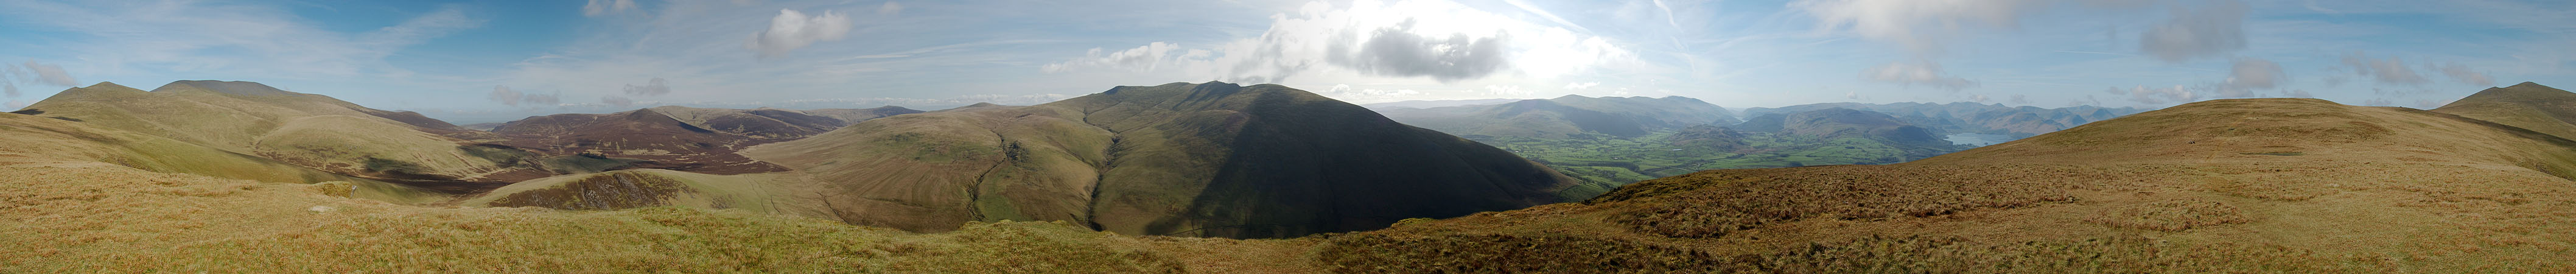 Lonscale Fell - Complete Panorama